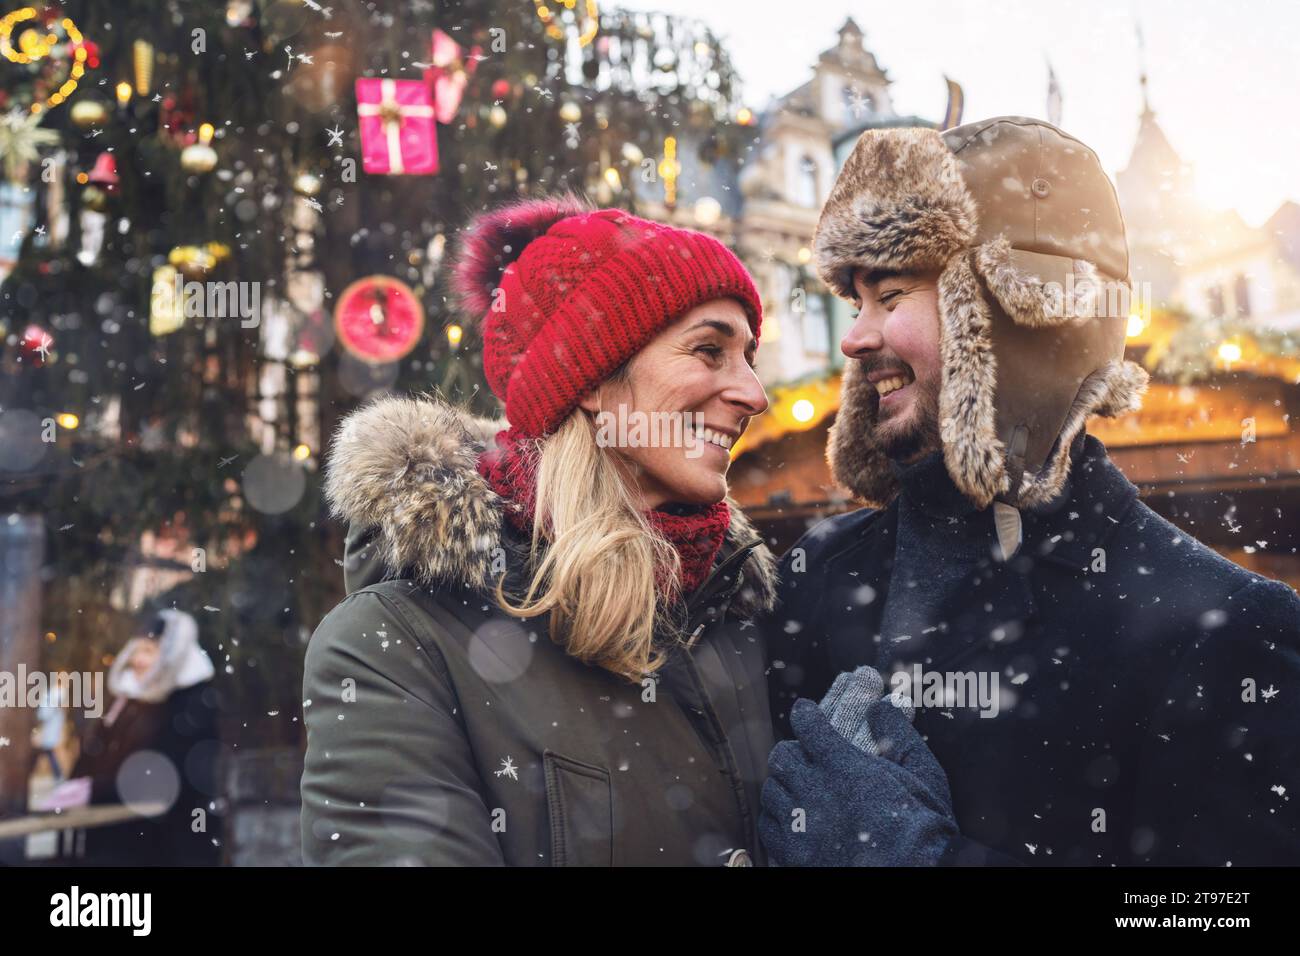 Couple in love smiling affectionately at each other in a snowy Christmas market Stock Photo